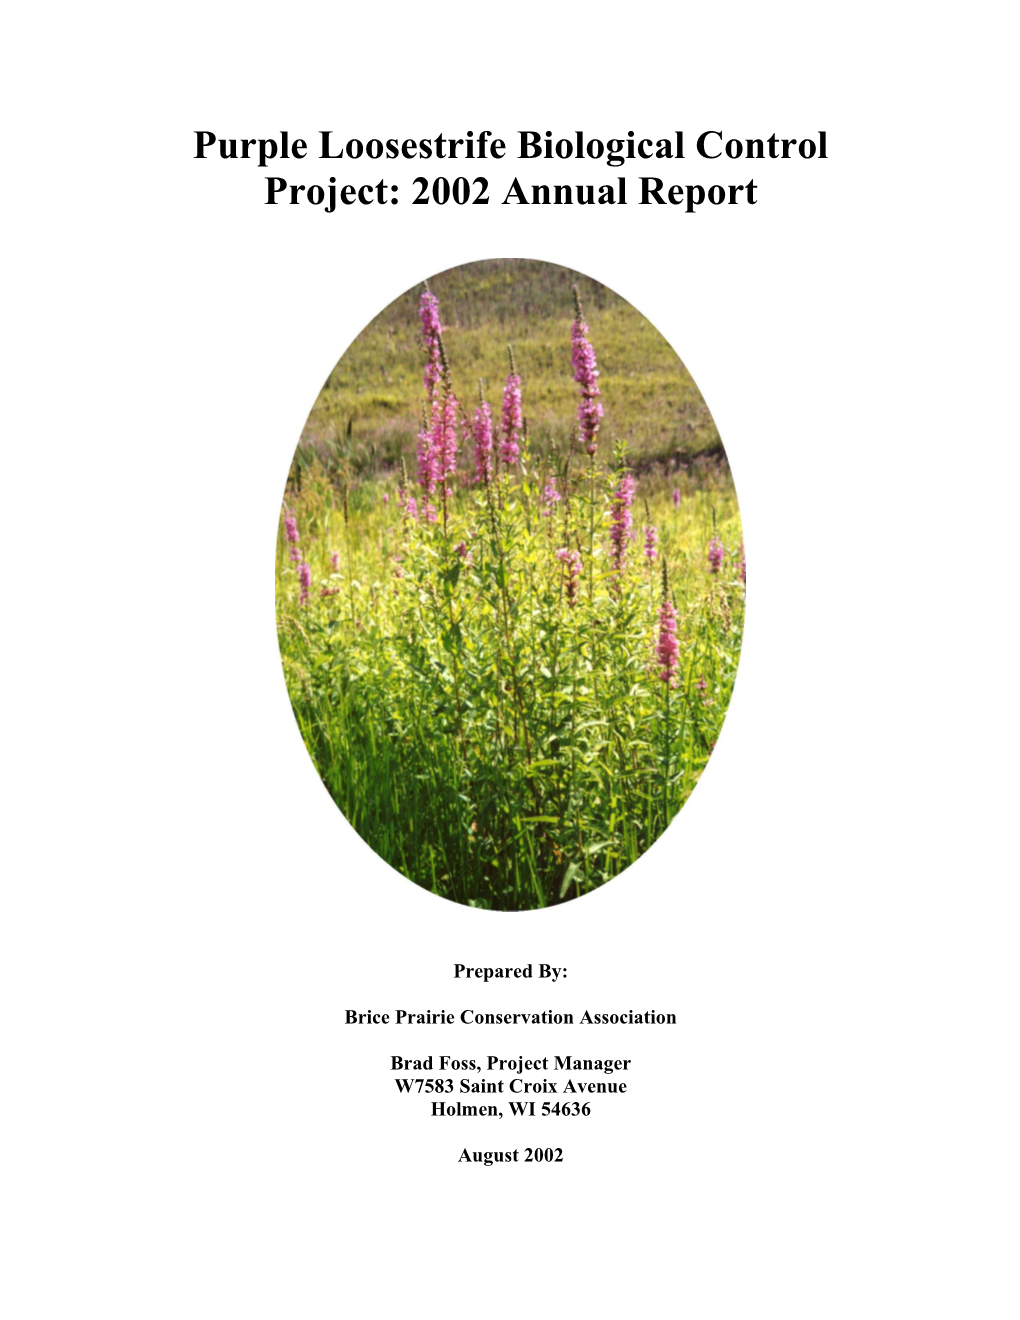 Purple Loosestrife Biological Control Project: 2002 Annual Report